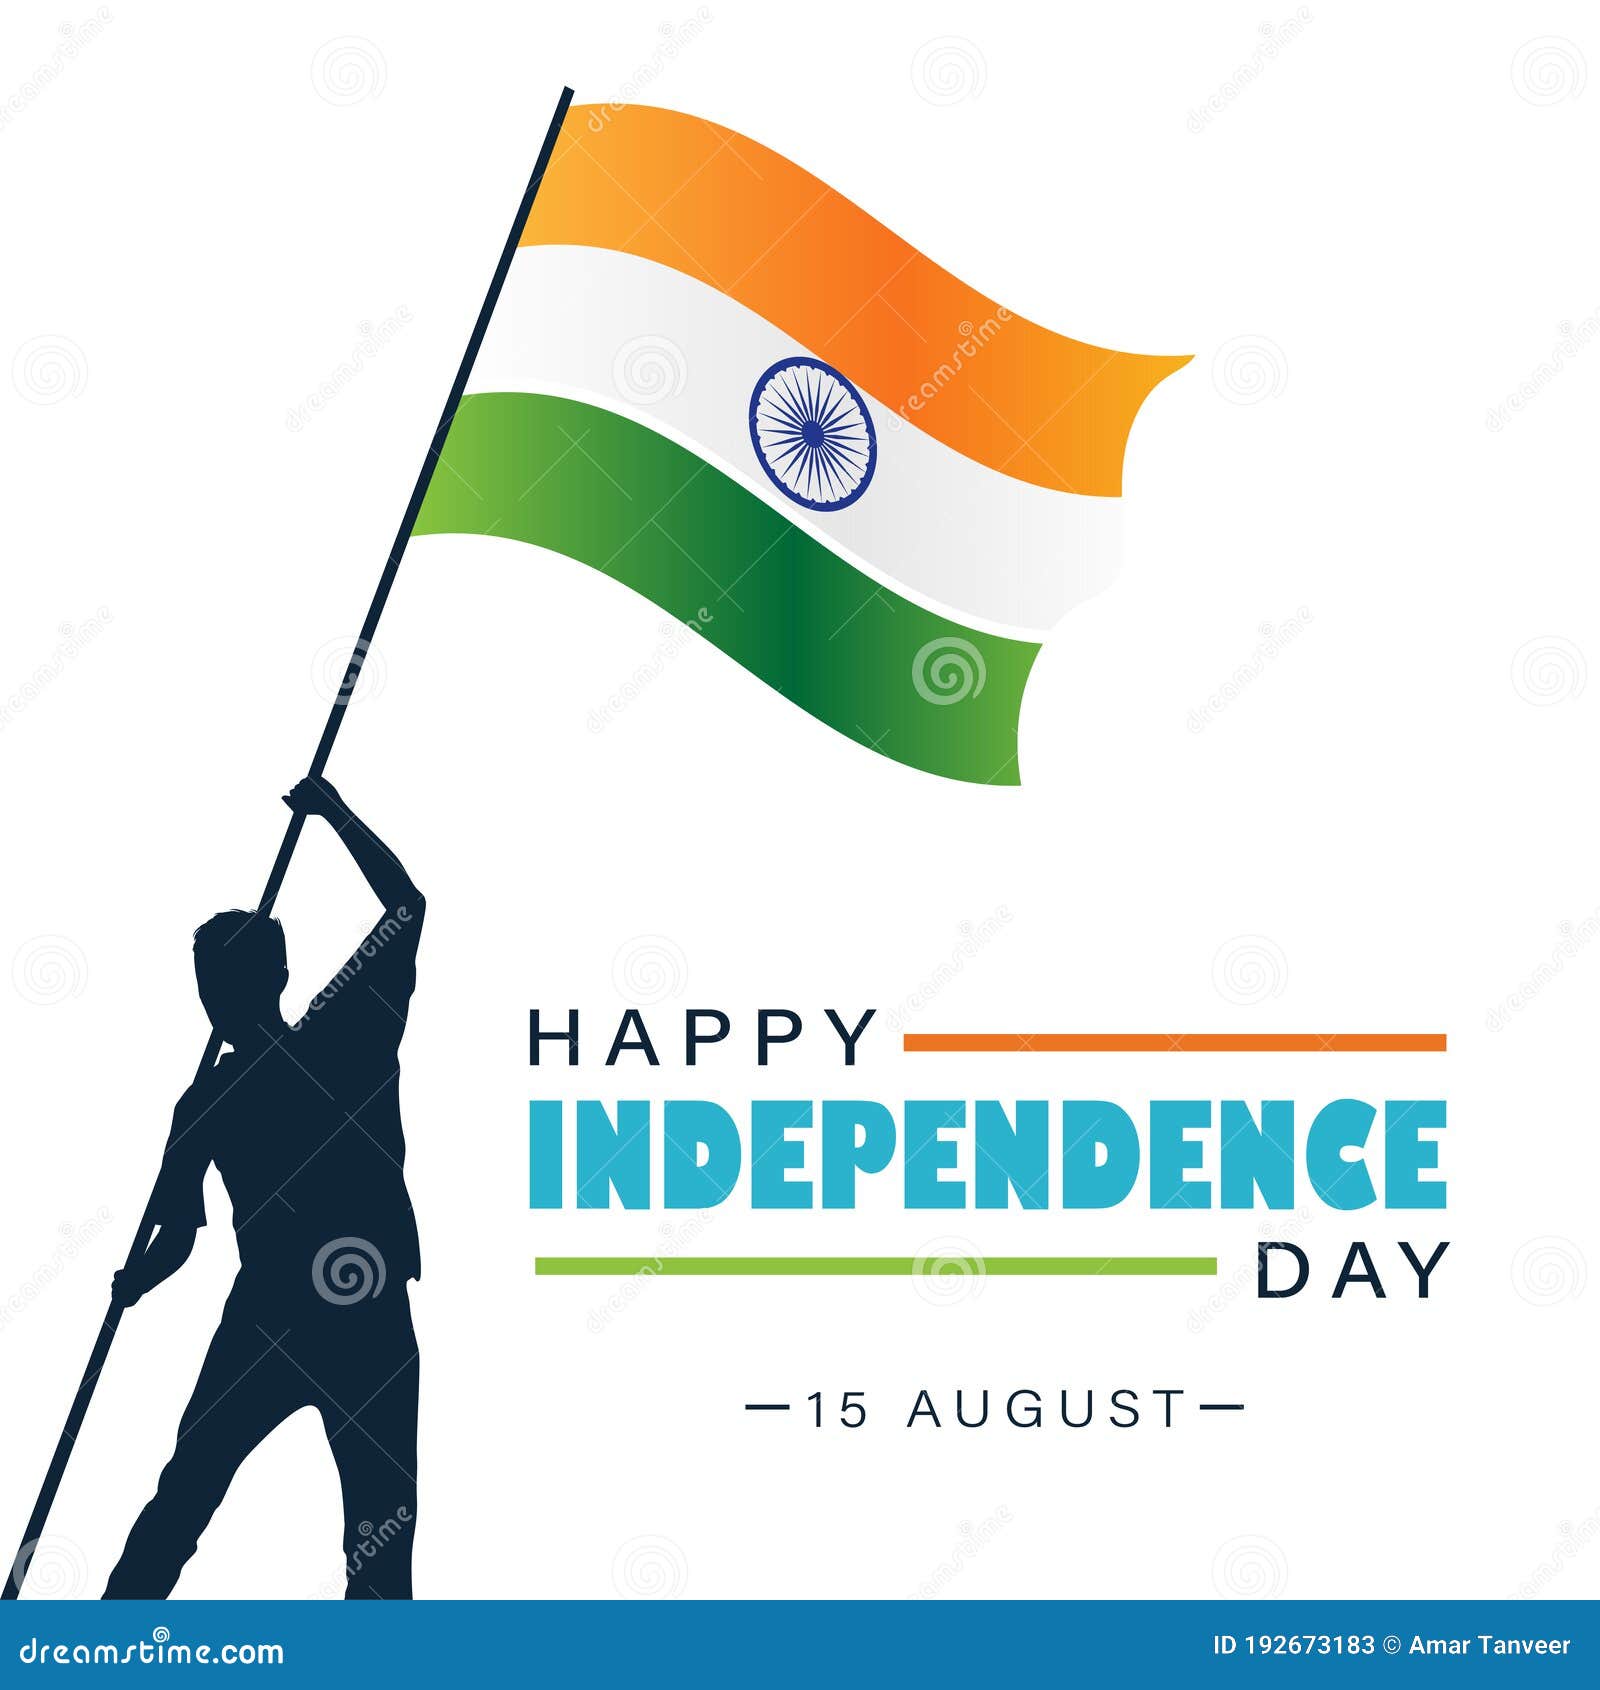 Happy Independence Day India, 15 August, Man Hoisting Indian Flag Greeting  Poster, Illustration Vector Stock Vector - Illustration of concept,  culture: 192673183